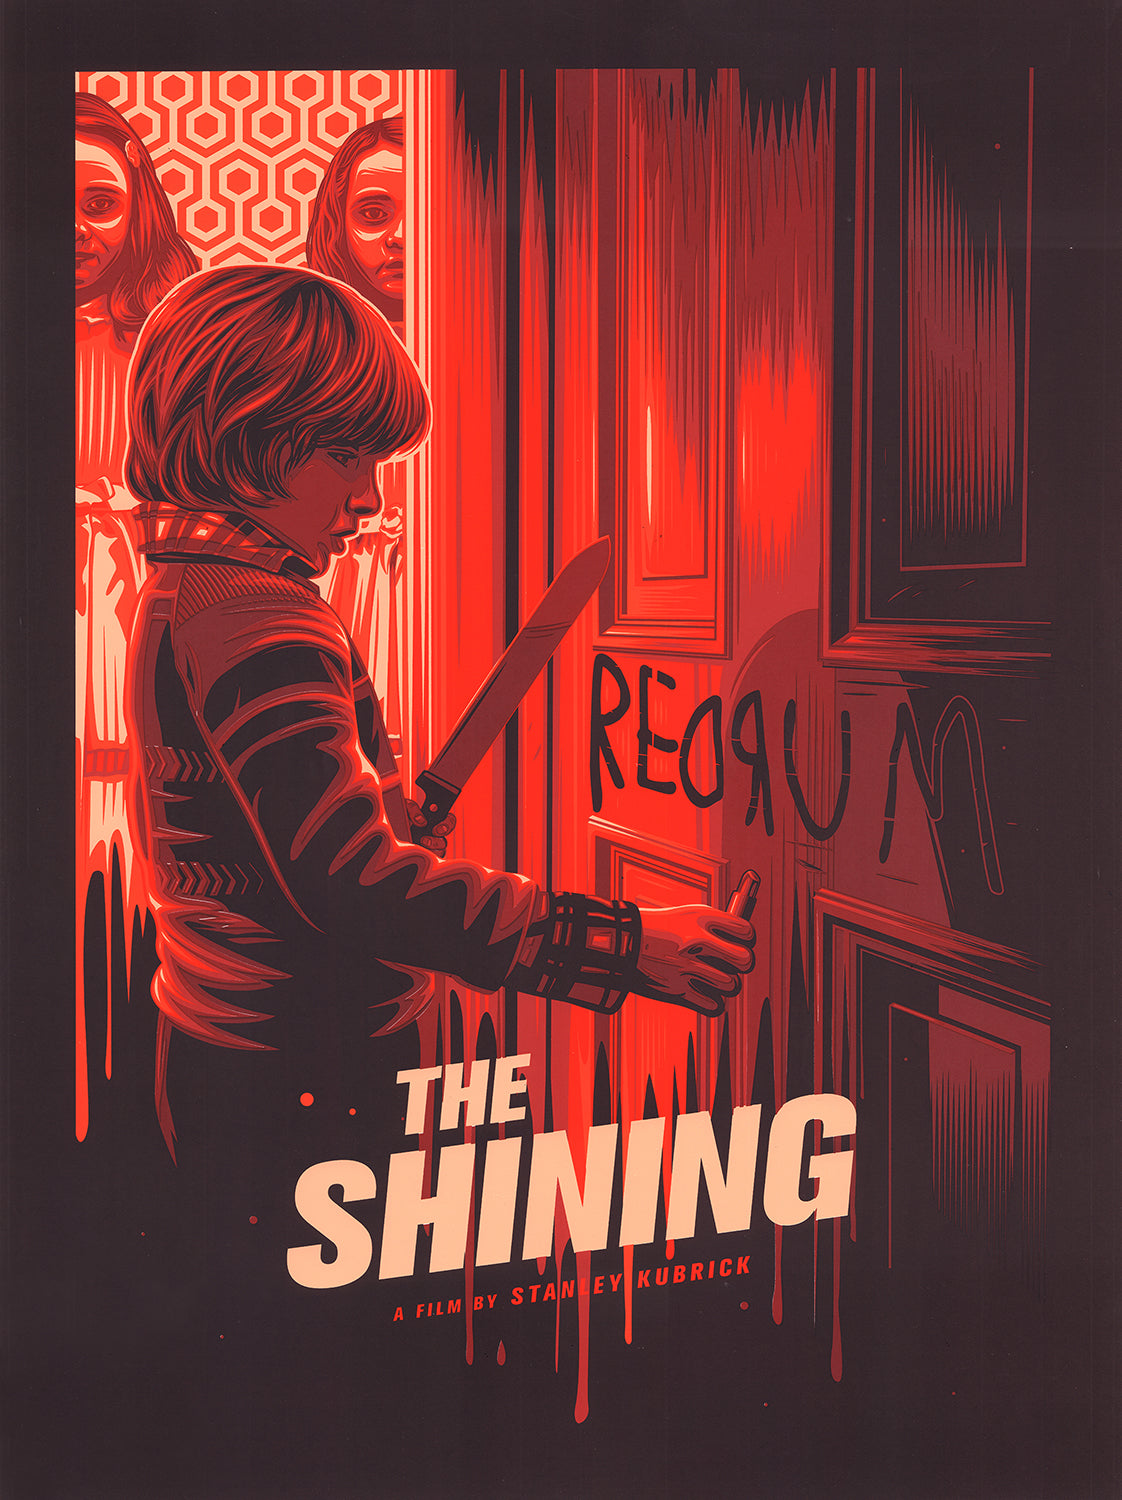 "The Shining" by Dave Stafford